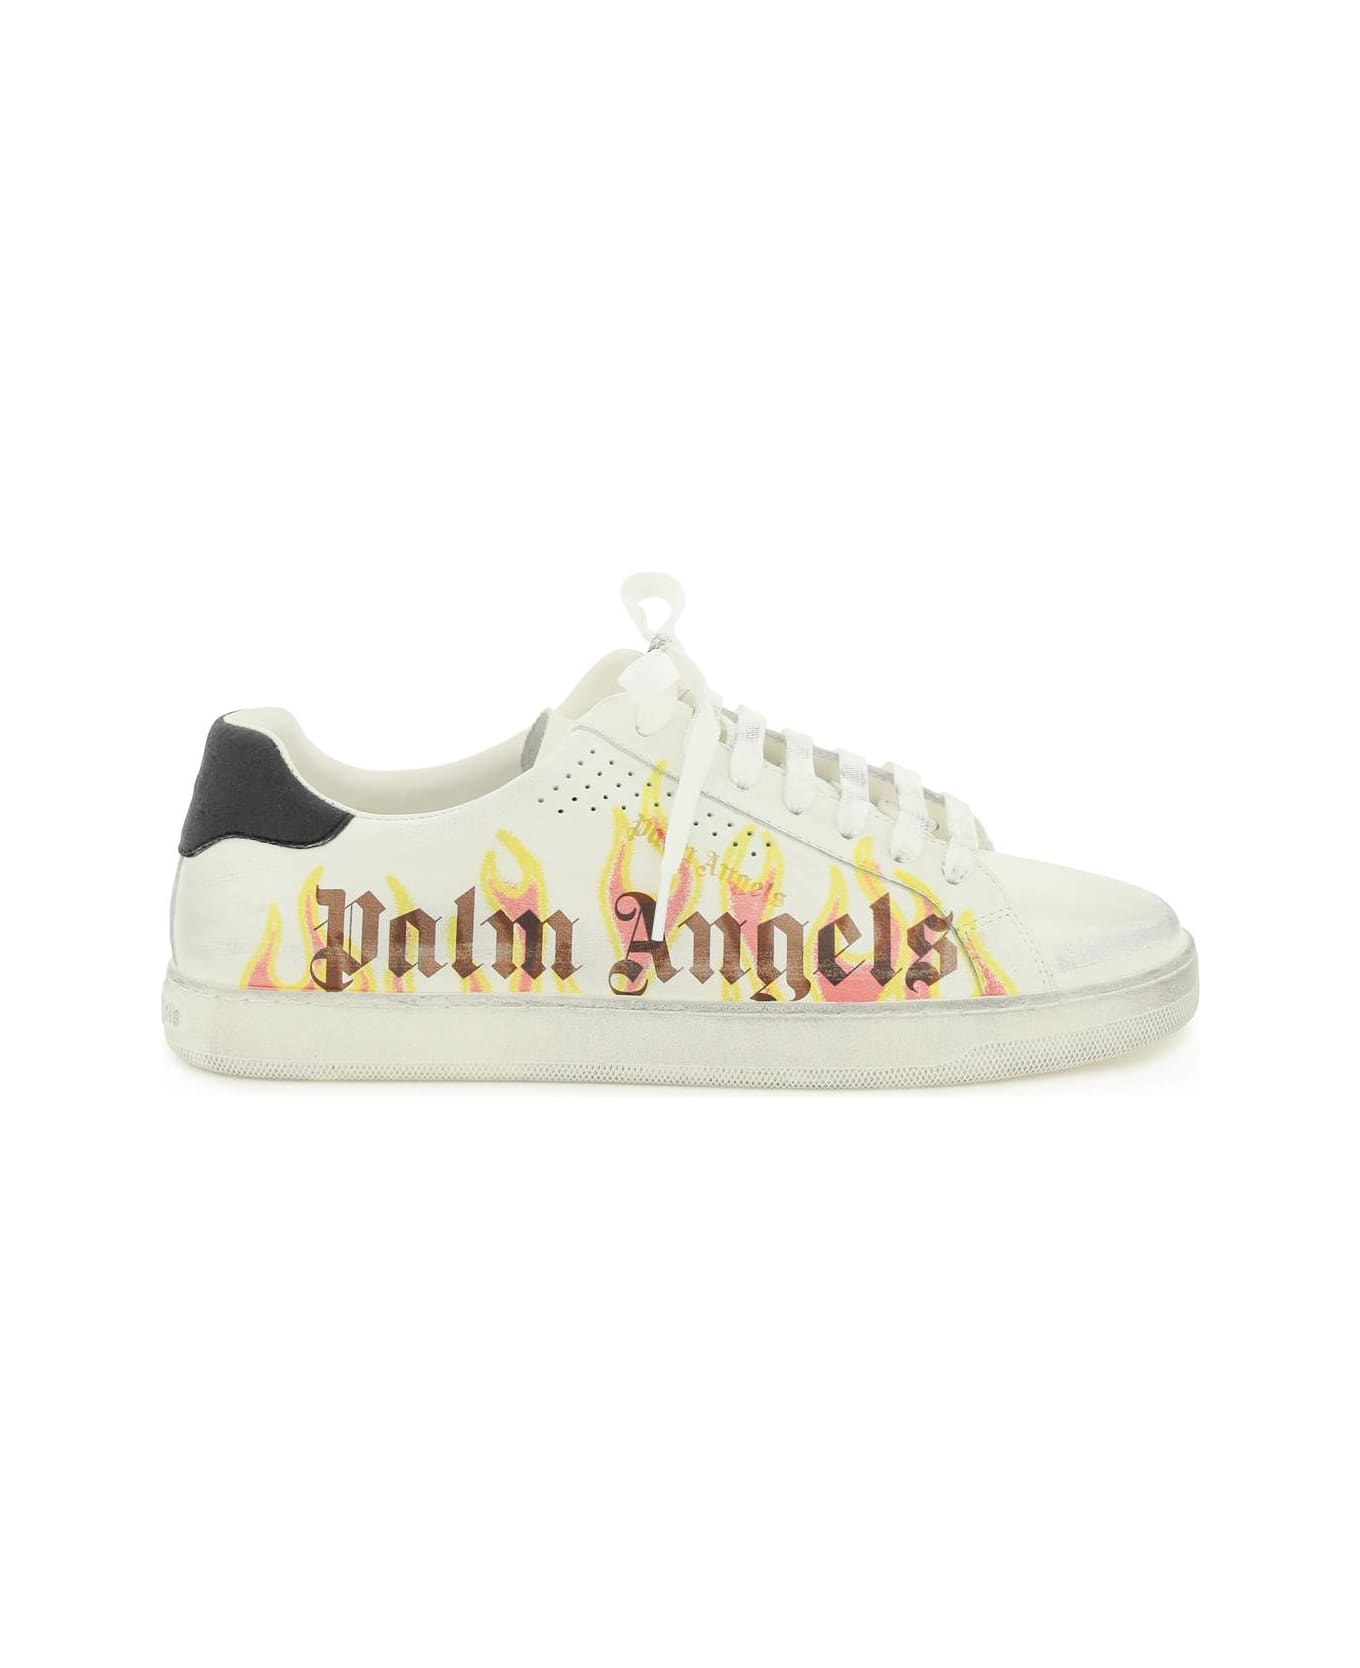 Palm Angels Palm One Sneakers - WHITE YELLOW (White)